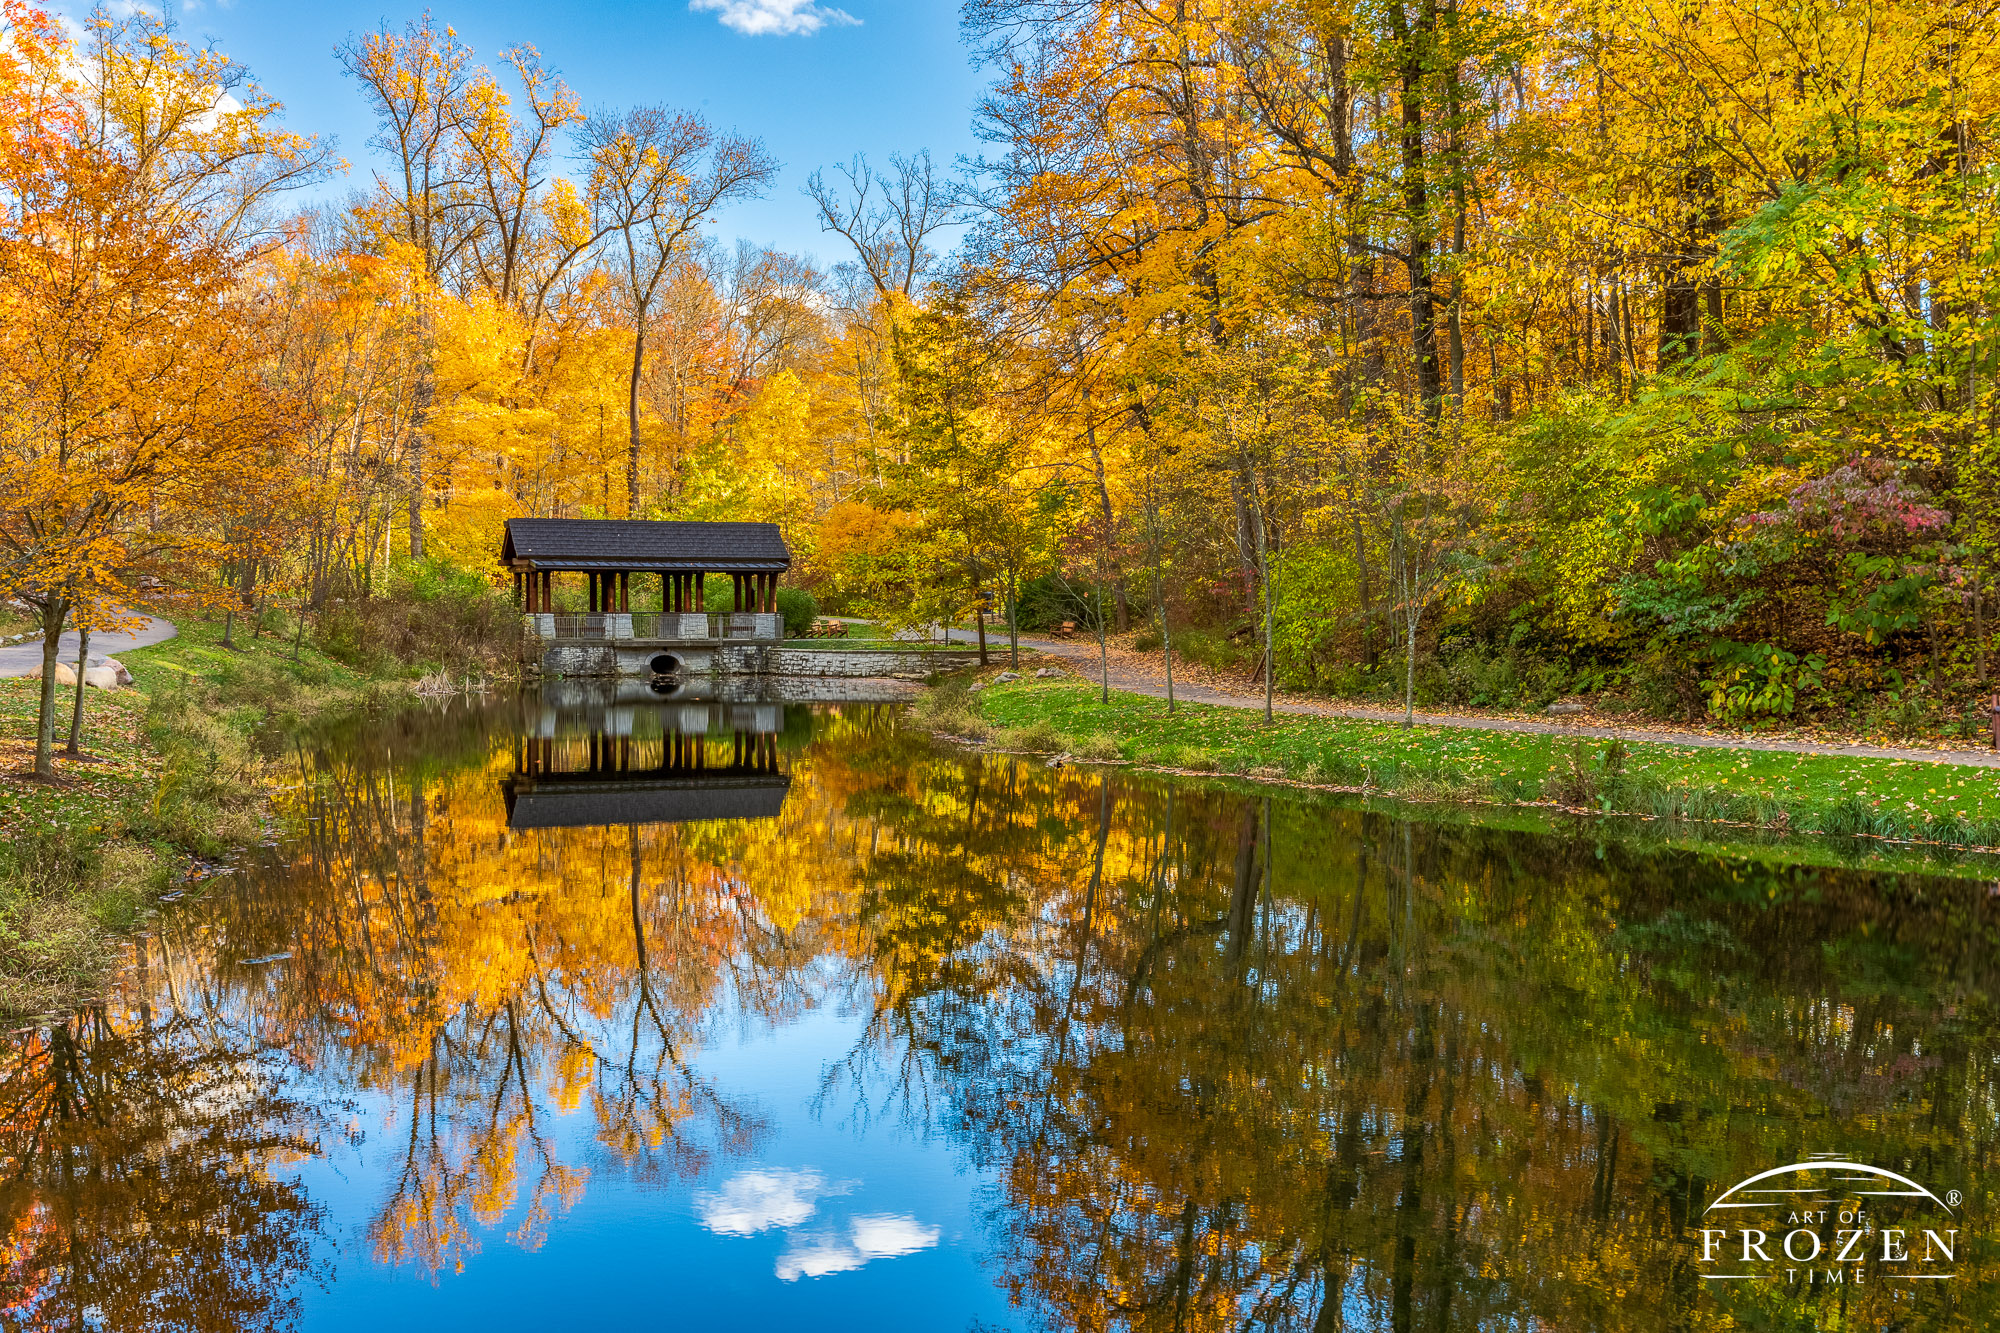 An Adirondack-style pavilion nested among bright yellow sugar maple trees and the calm pond perfectly reflects the entire scene